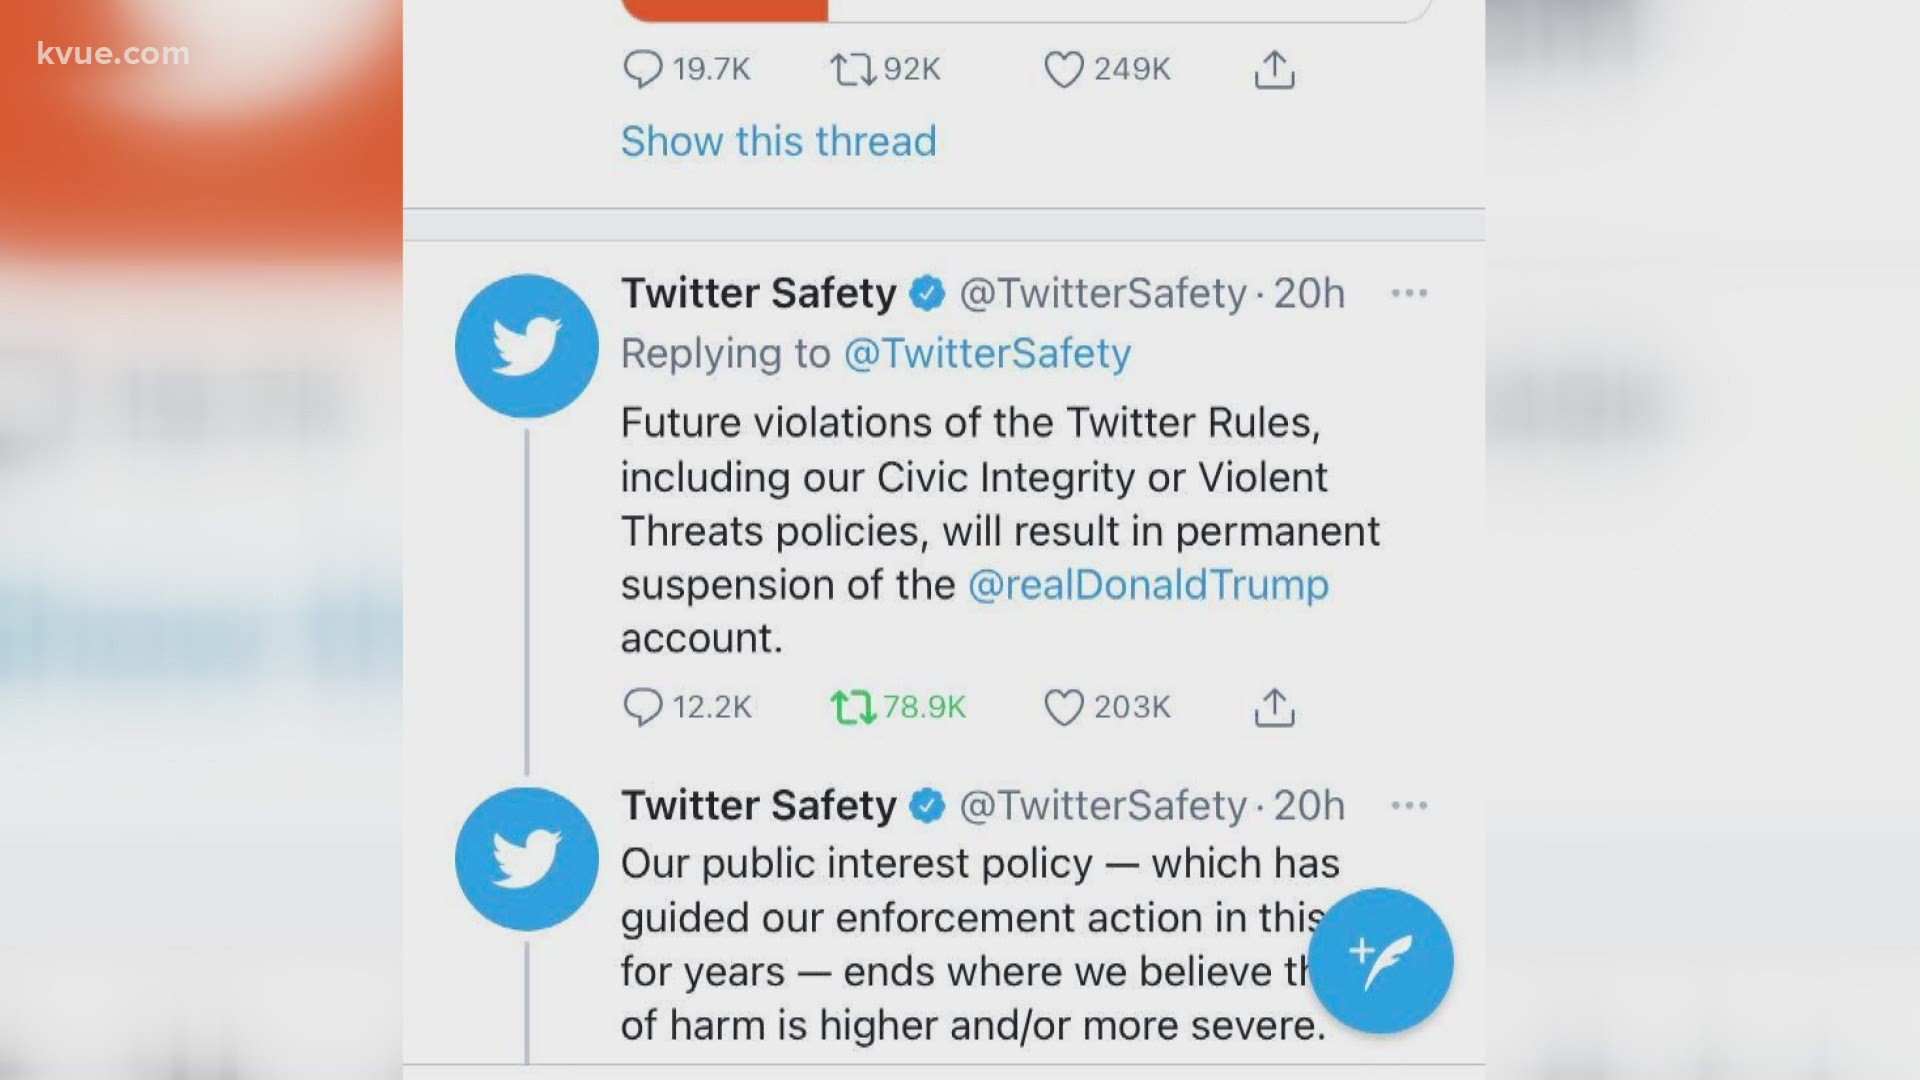 Following the violence at the U.S. Capitol, social media platforms Instagram, Facebook and Twitter placed bans or restrictions on President Trump's accounts.